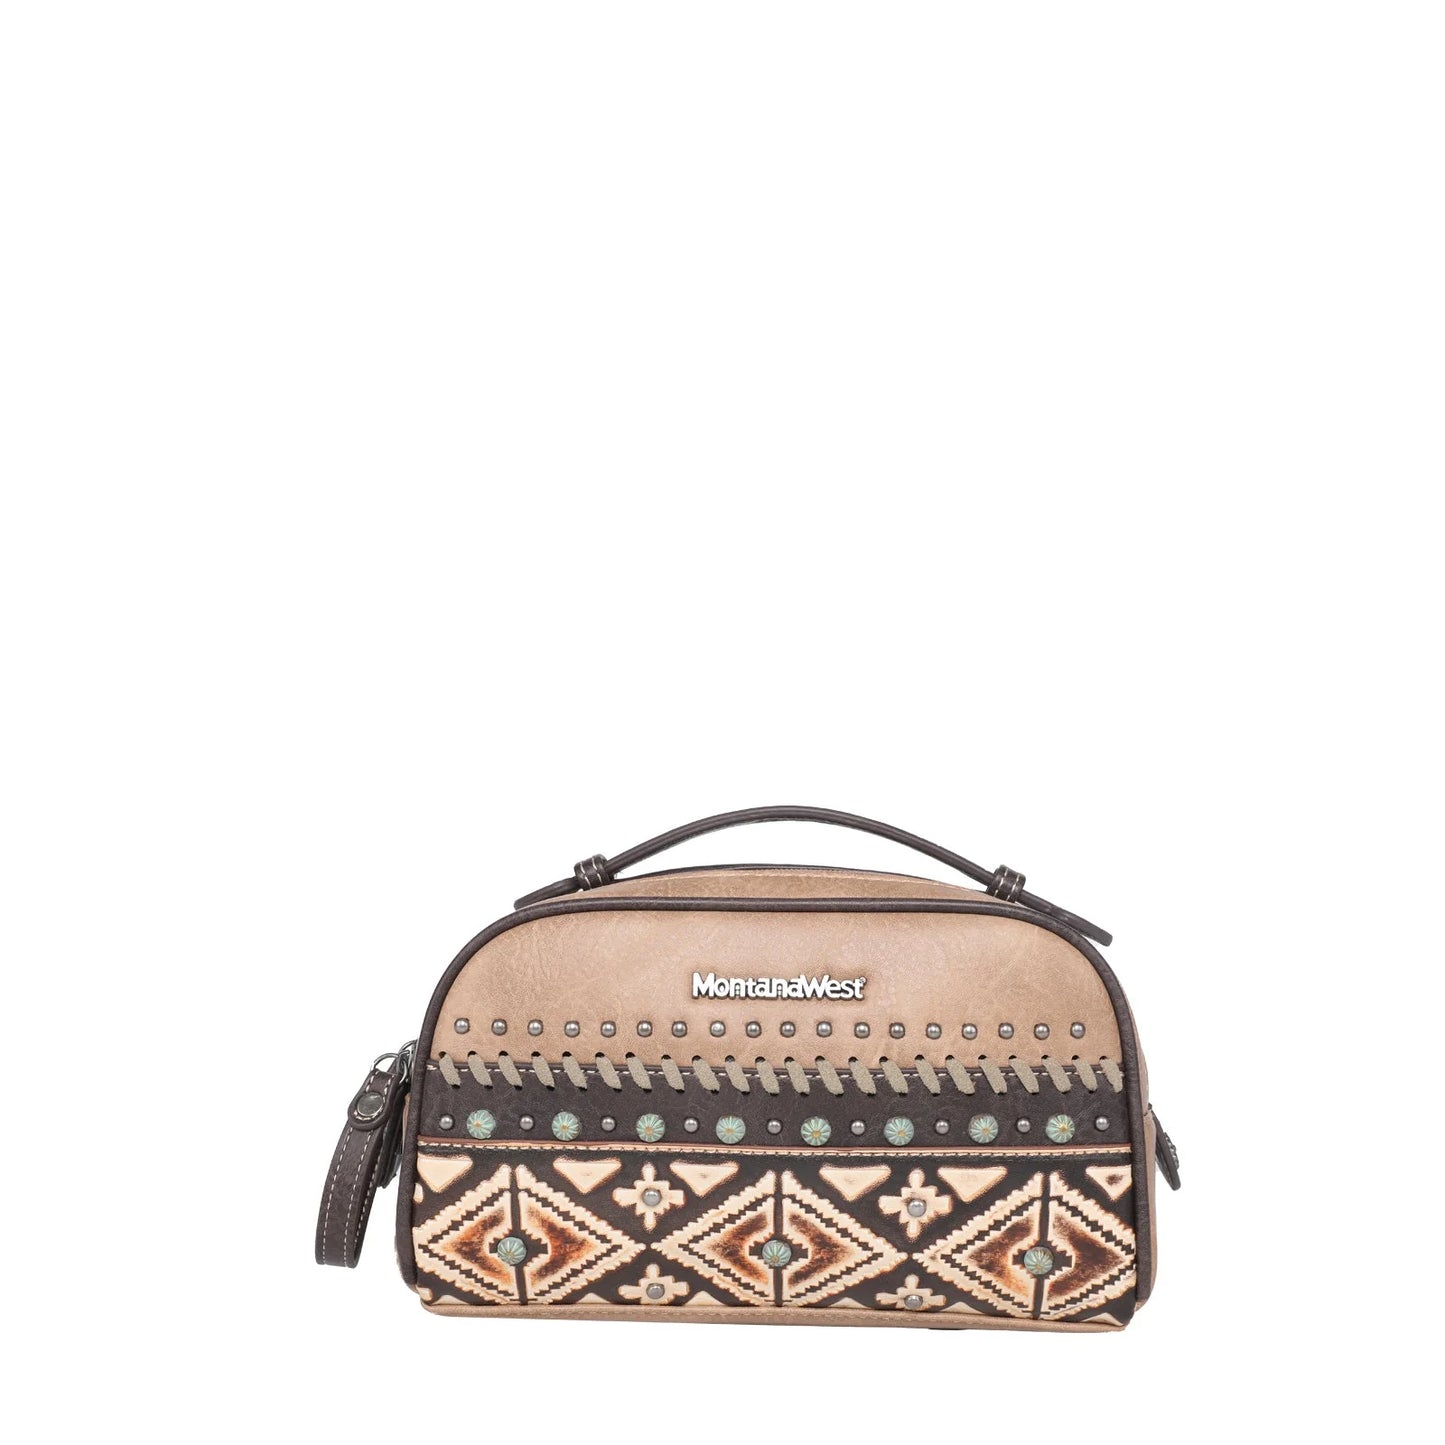 Montana West Travel Pouch (Toiletry Bag)